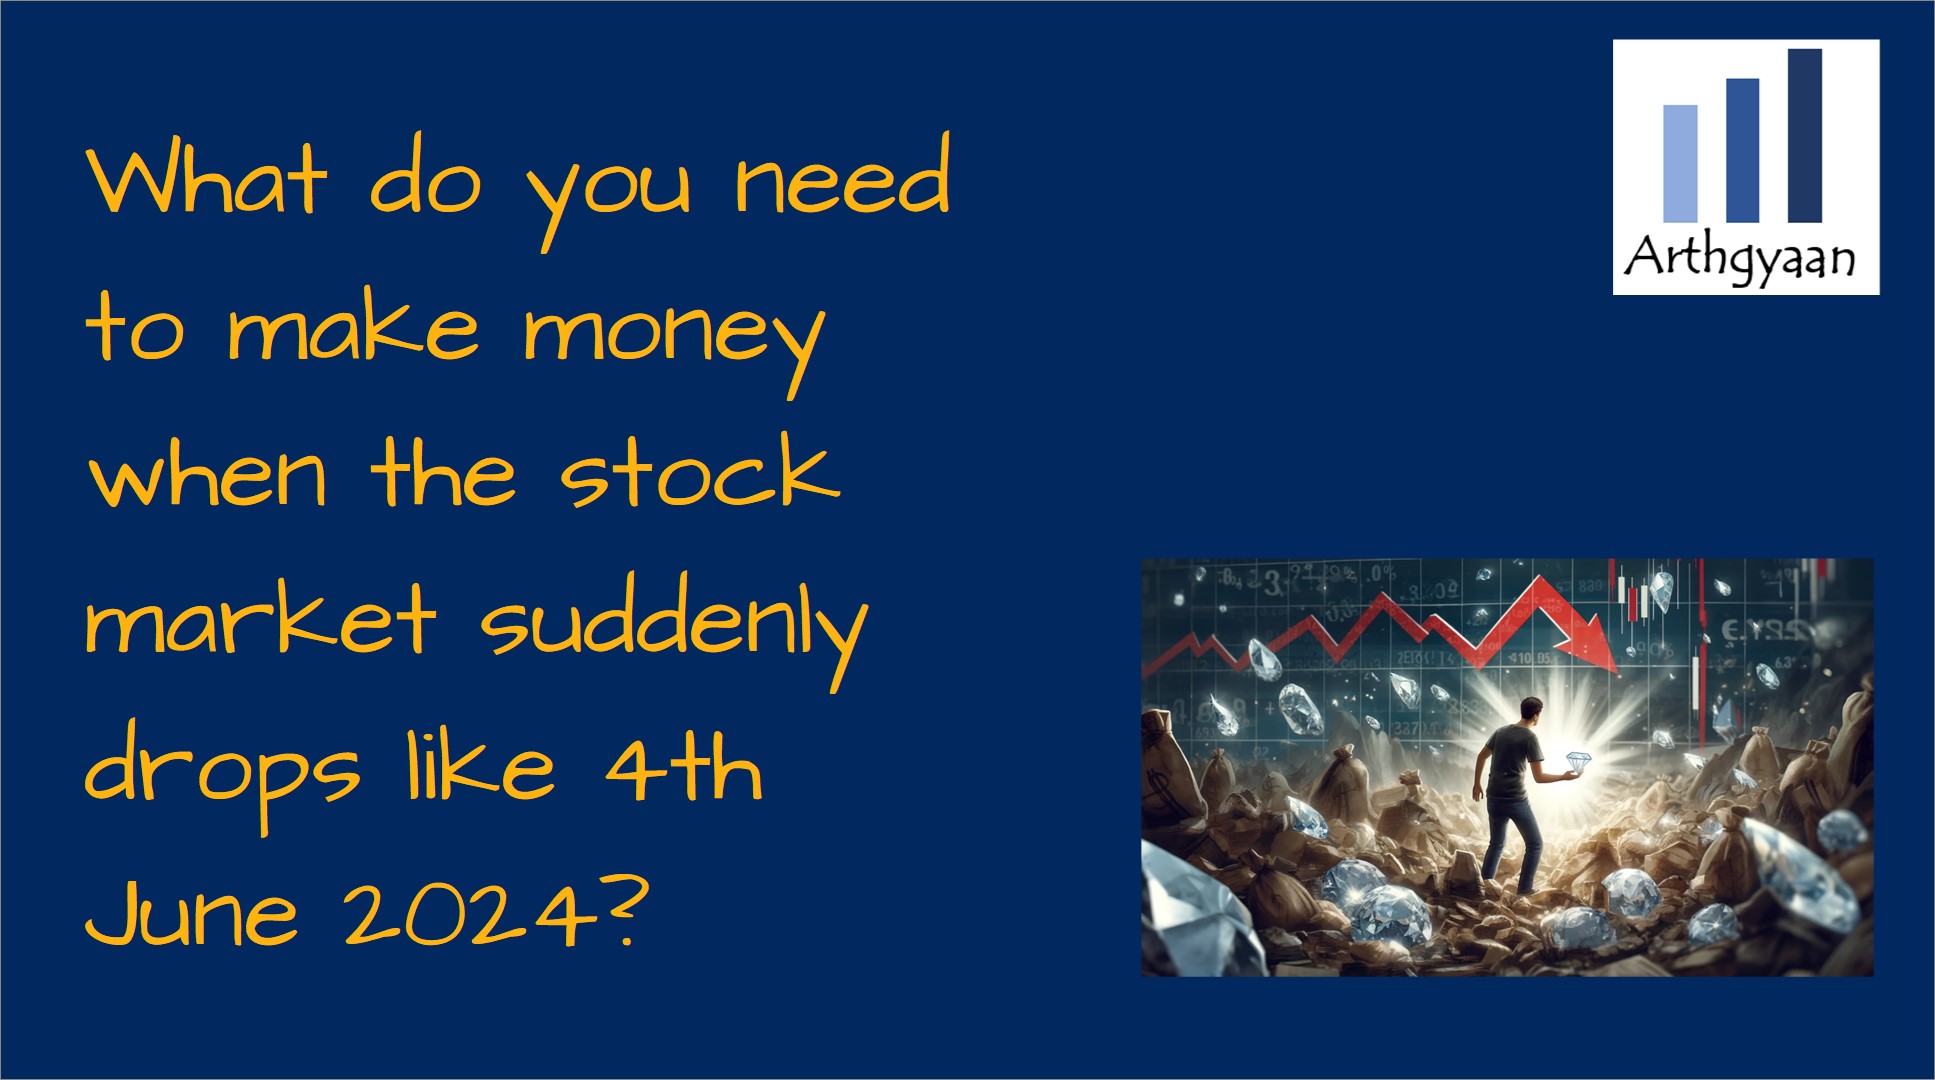 What do you need to make money when the stock market suddenly drops like 4th June 2024?